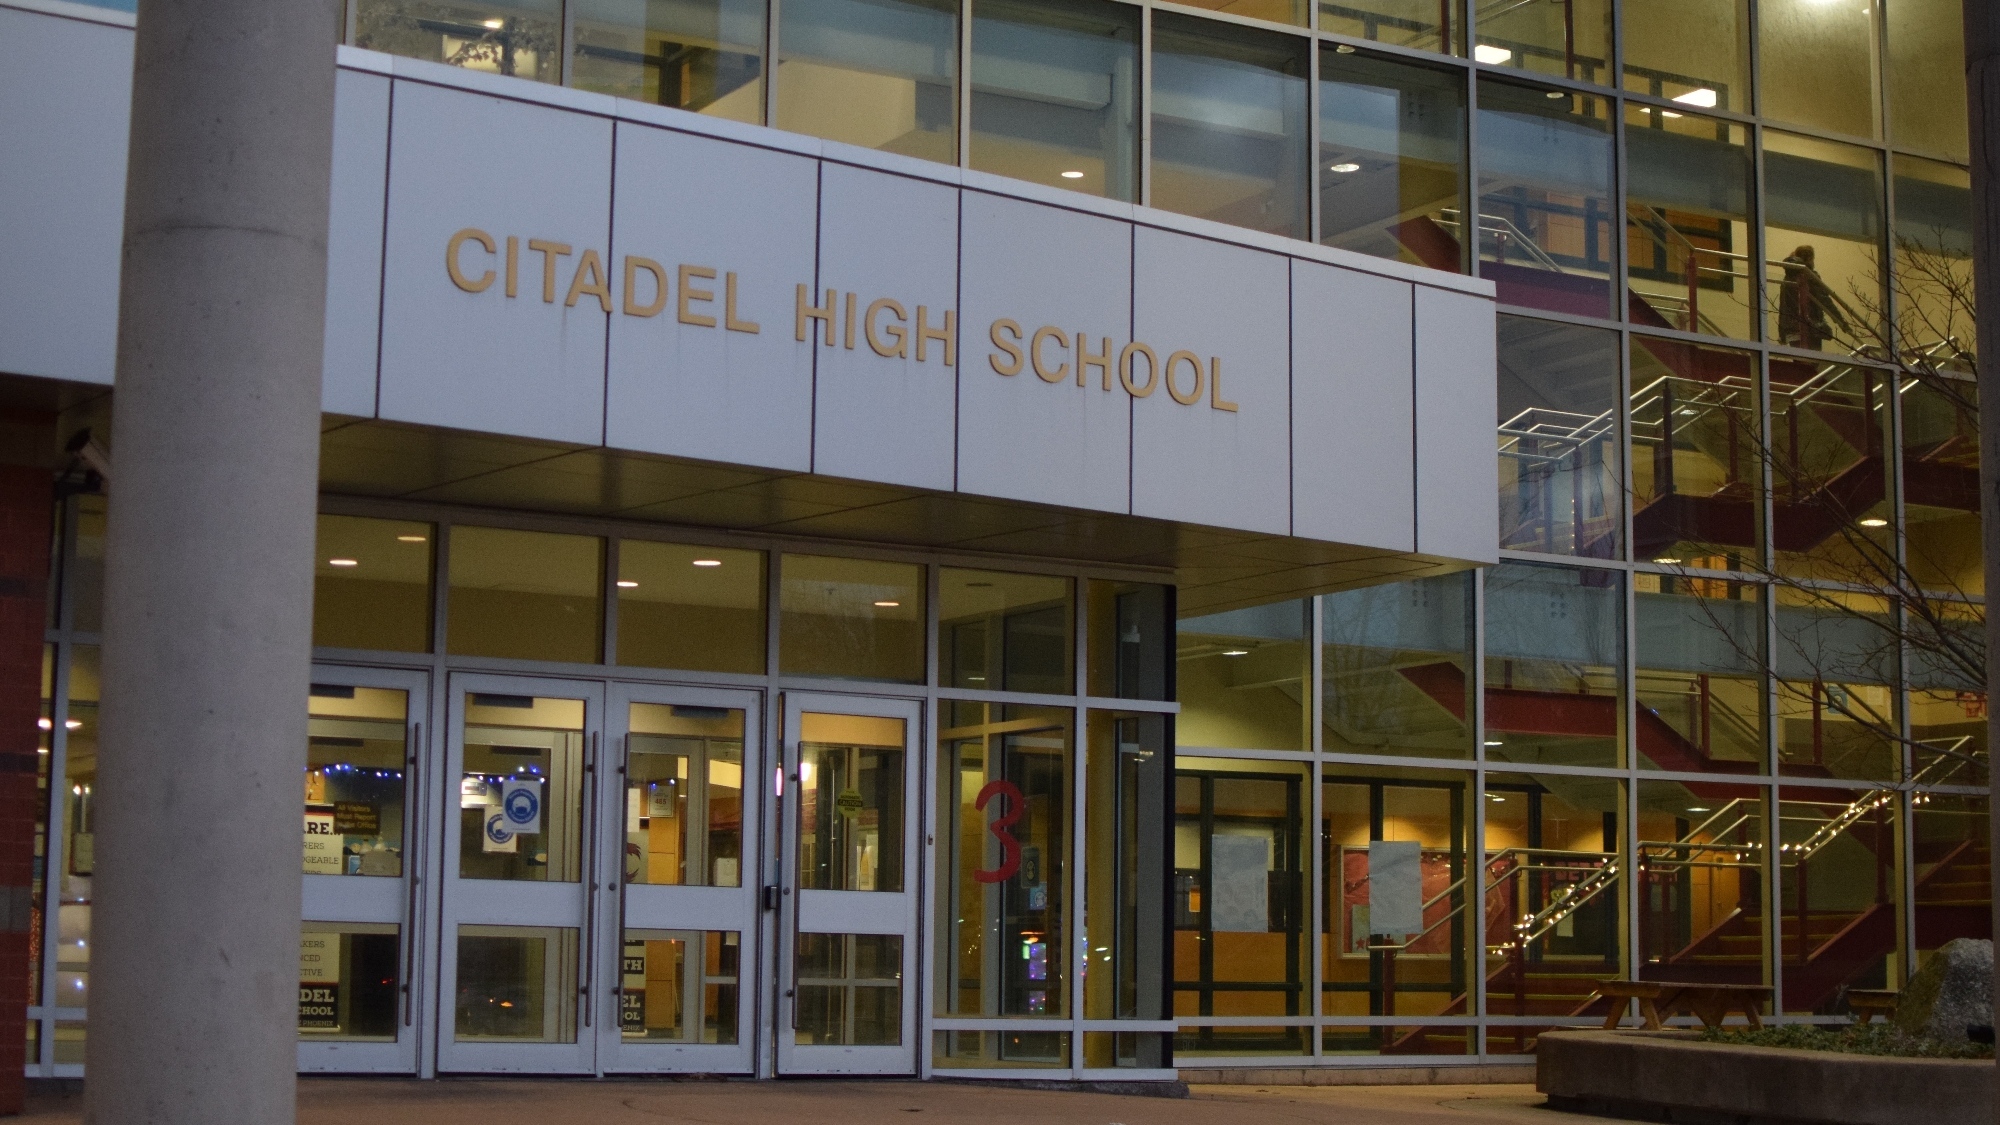 The front of a high school with the name Citadel High School written above the door.